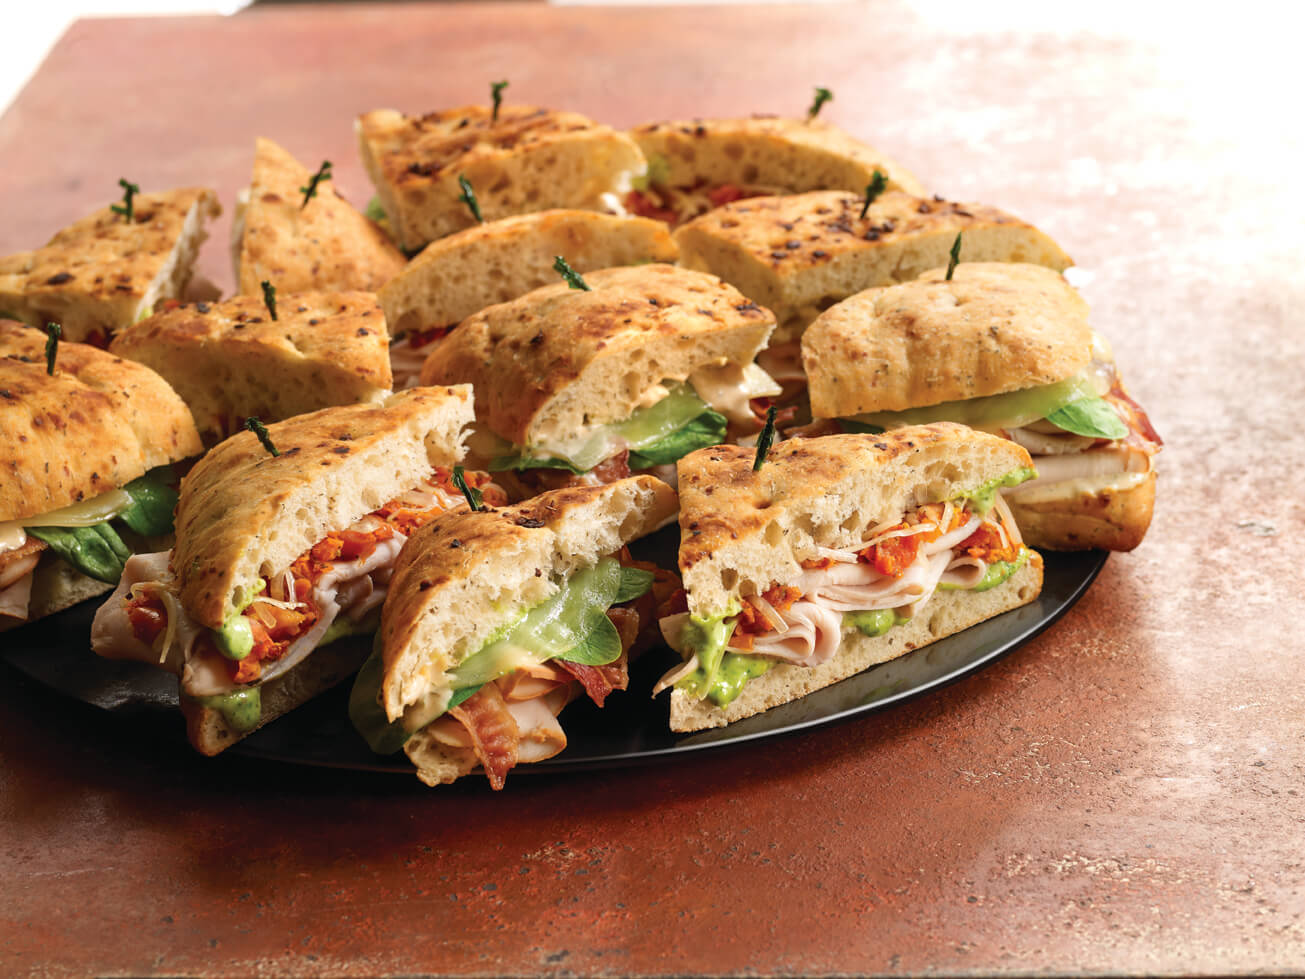 Home Catering | Residential Party Trays | Jason's Deli